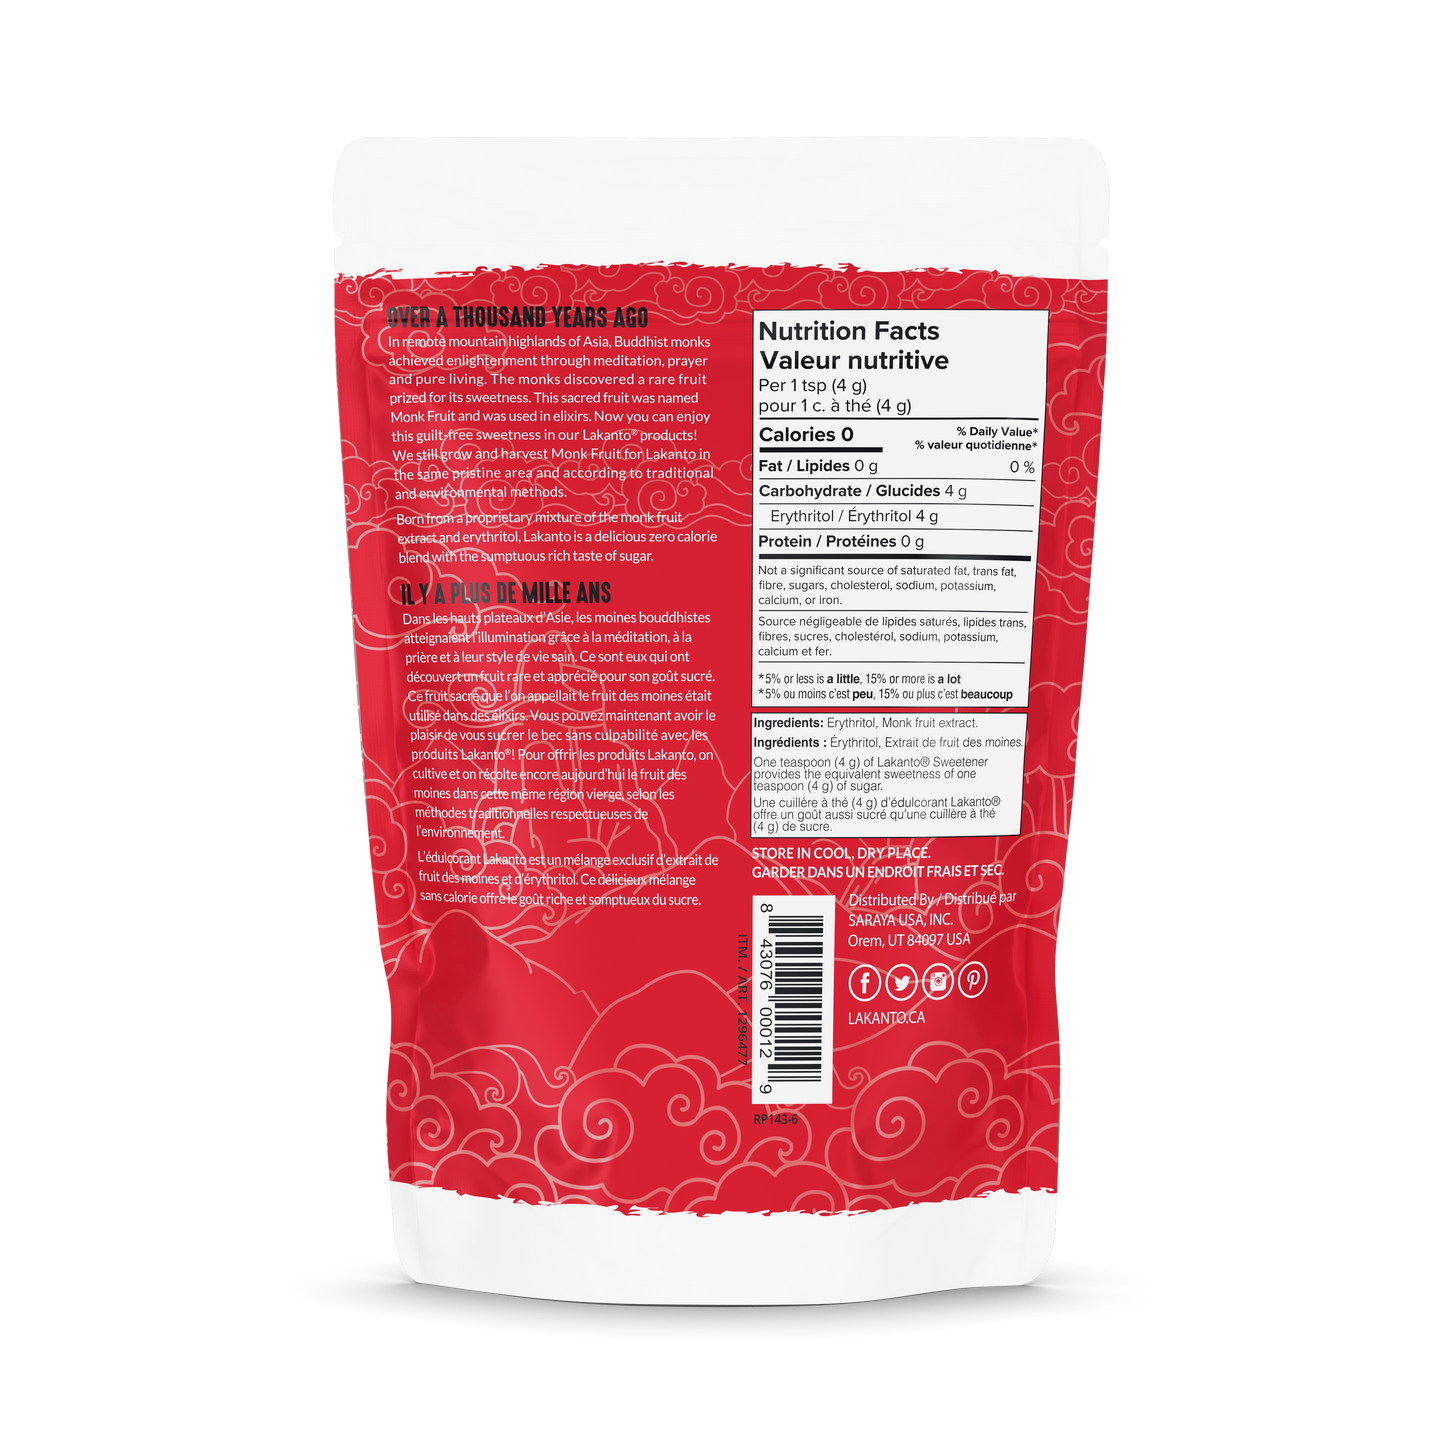 Classic Monk Fruit Sweetener with Erythritol - White Sugar Substitute